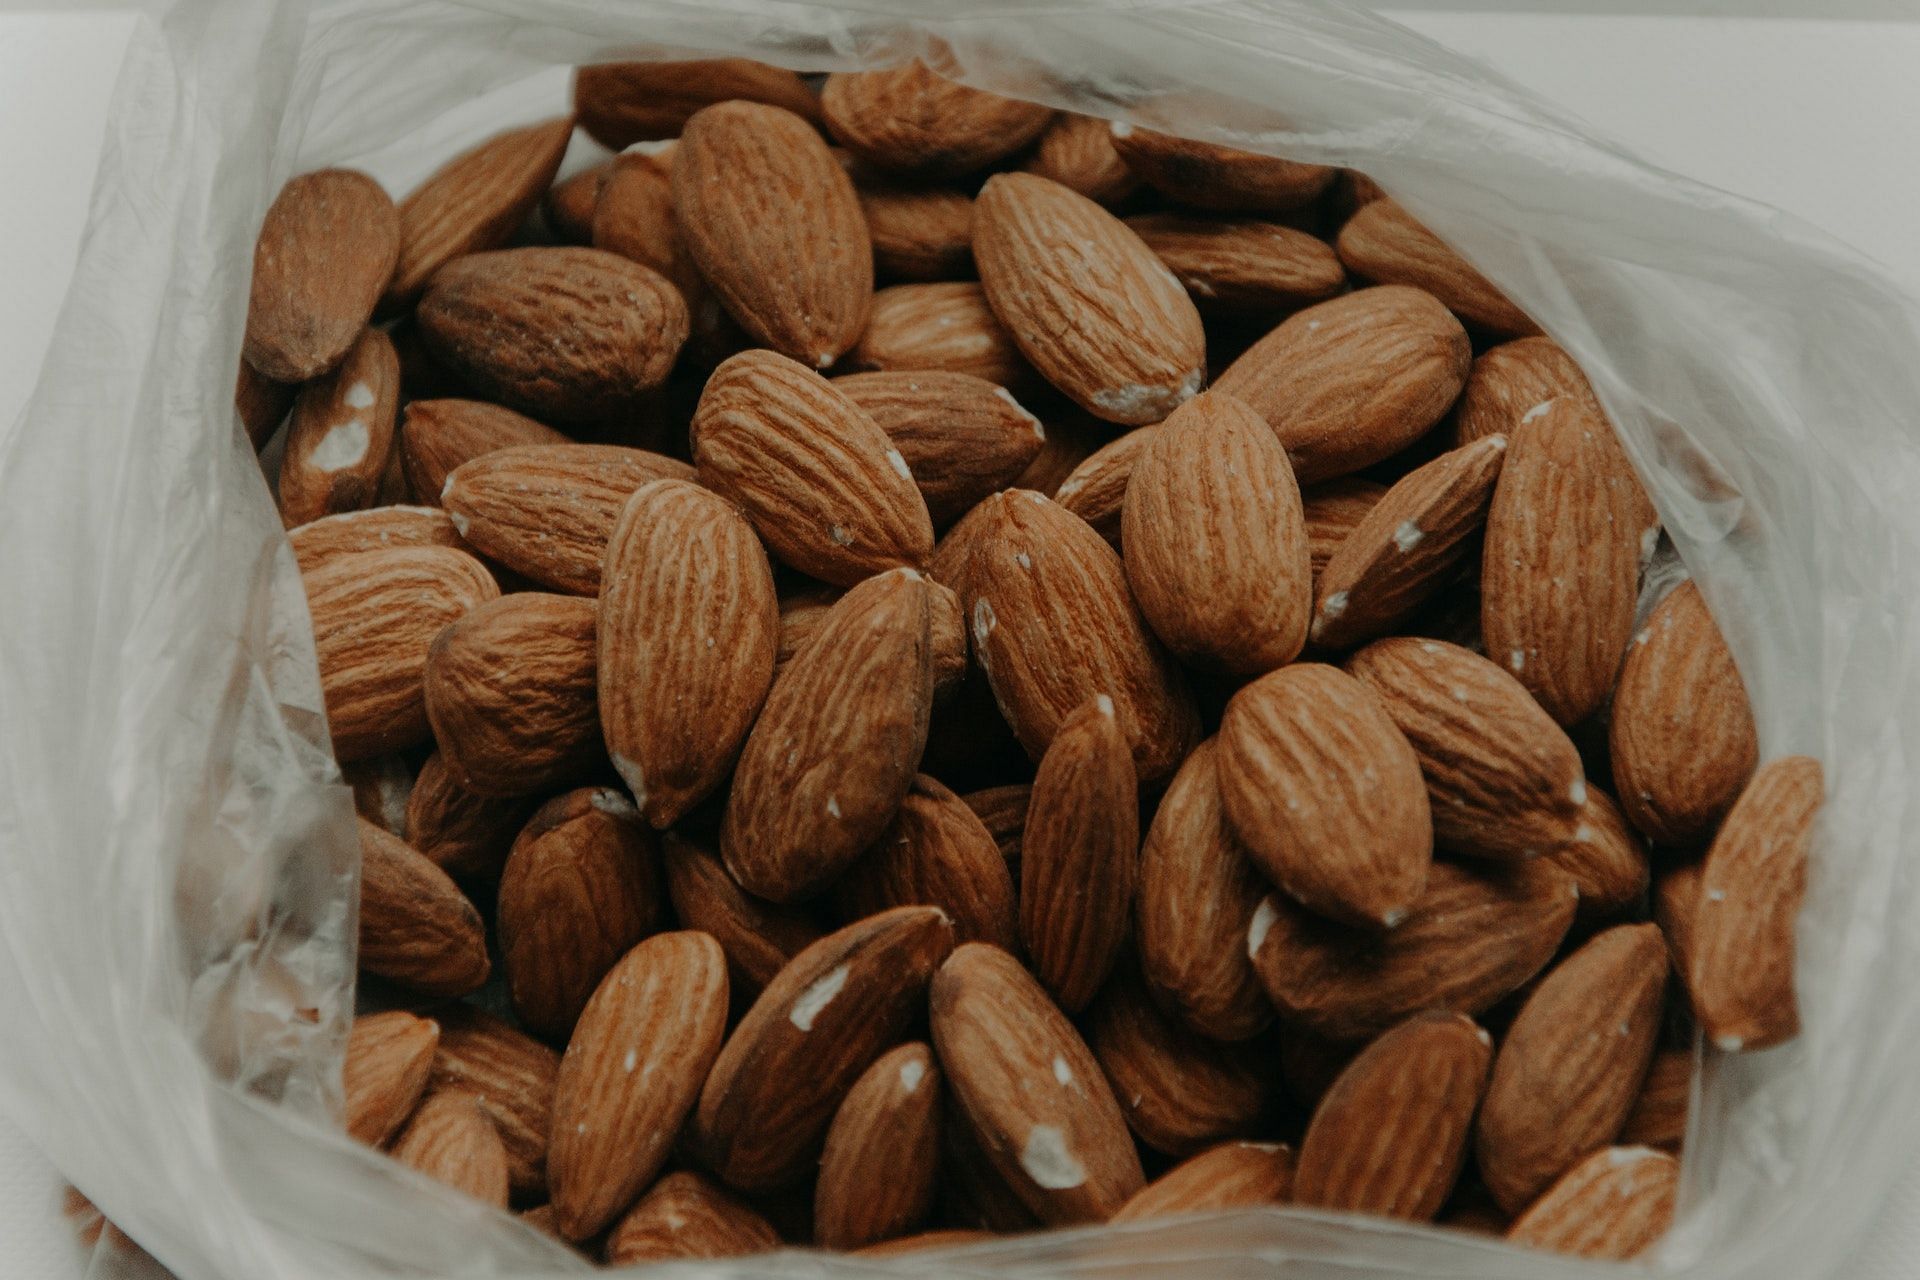 Nuts are among some of the healthiest sources of calcium for vegans. (Photo via Pexels/Irina Iriser)